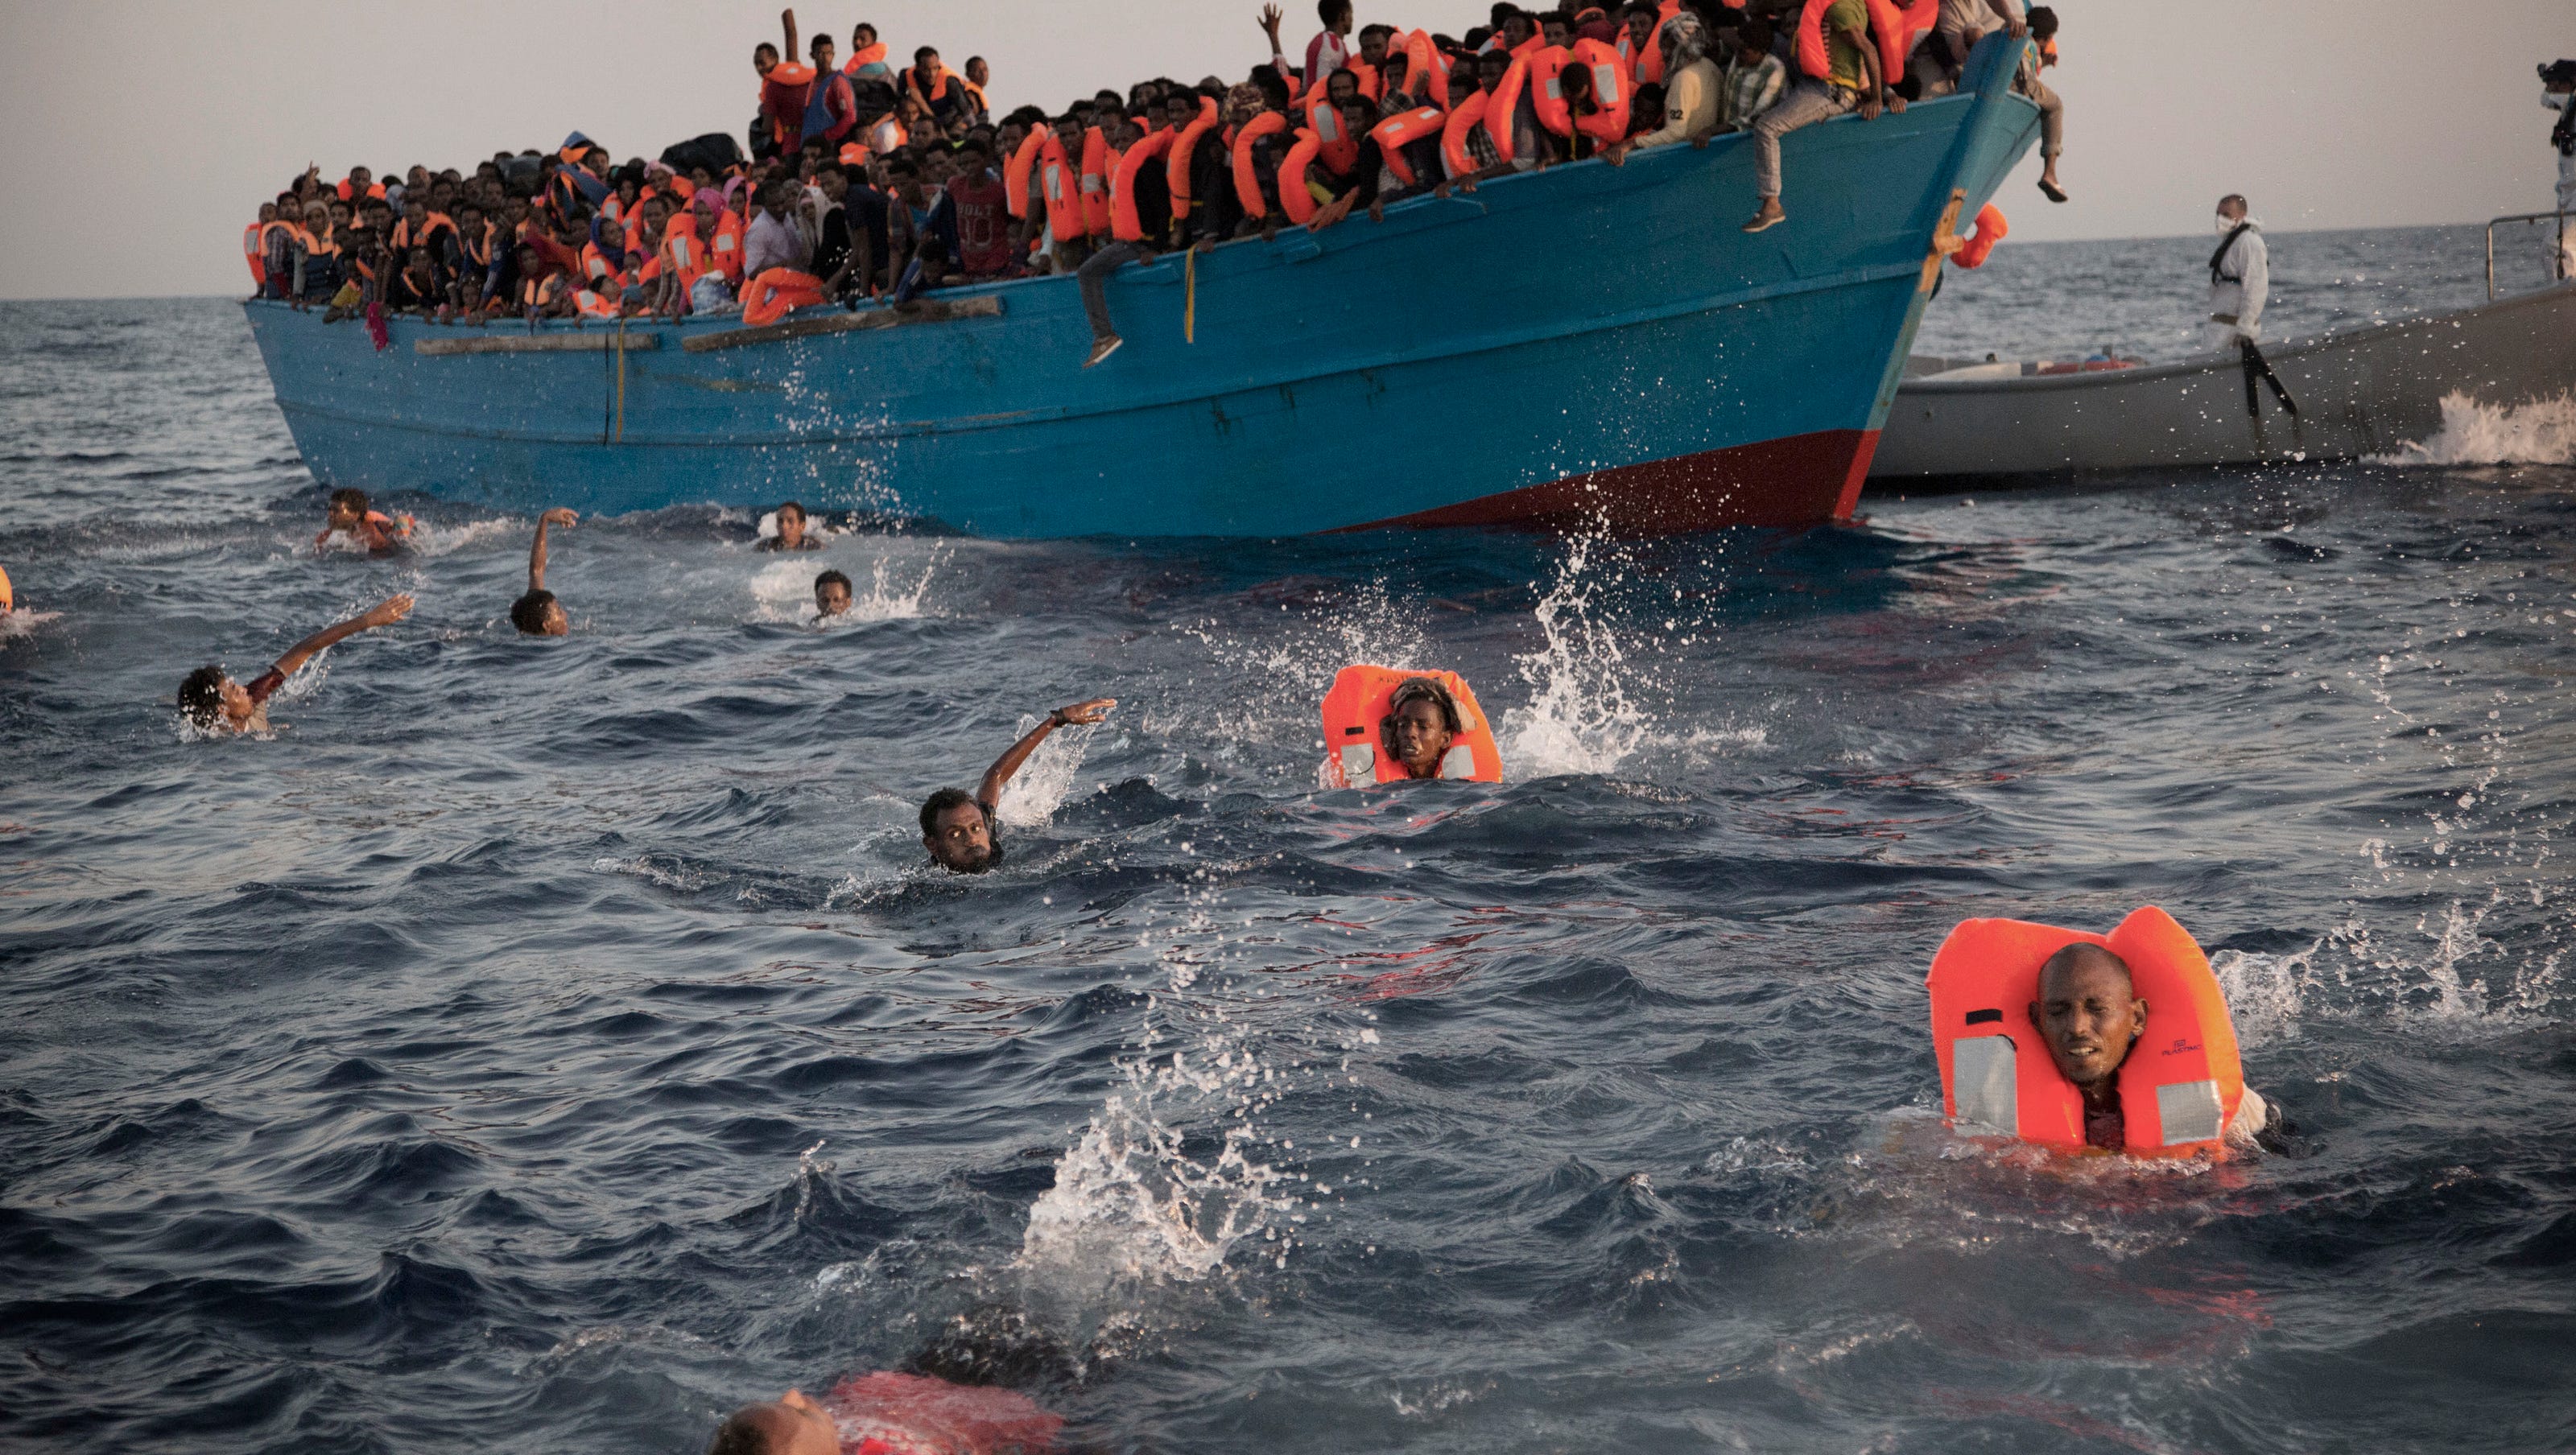 Stunning Photos Show Thousands Of Migrants Rescued Off Coast Of Libya